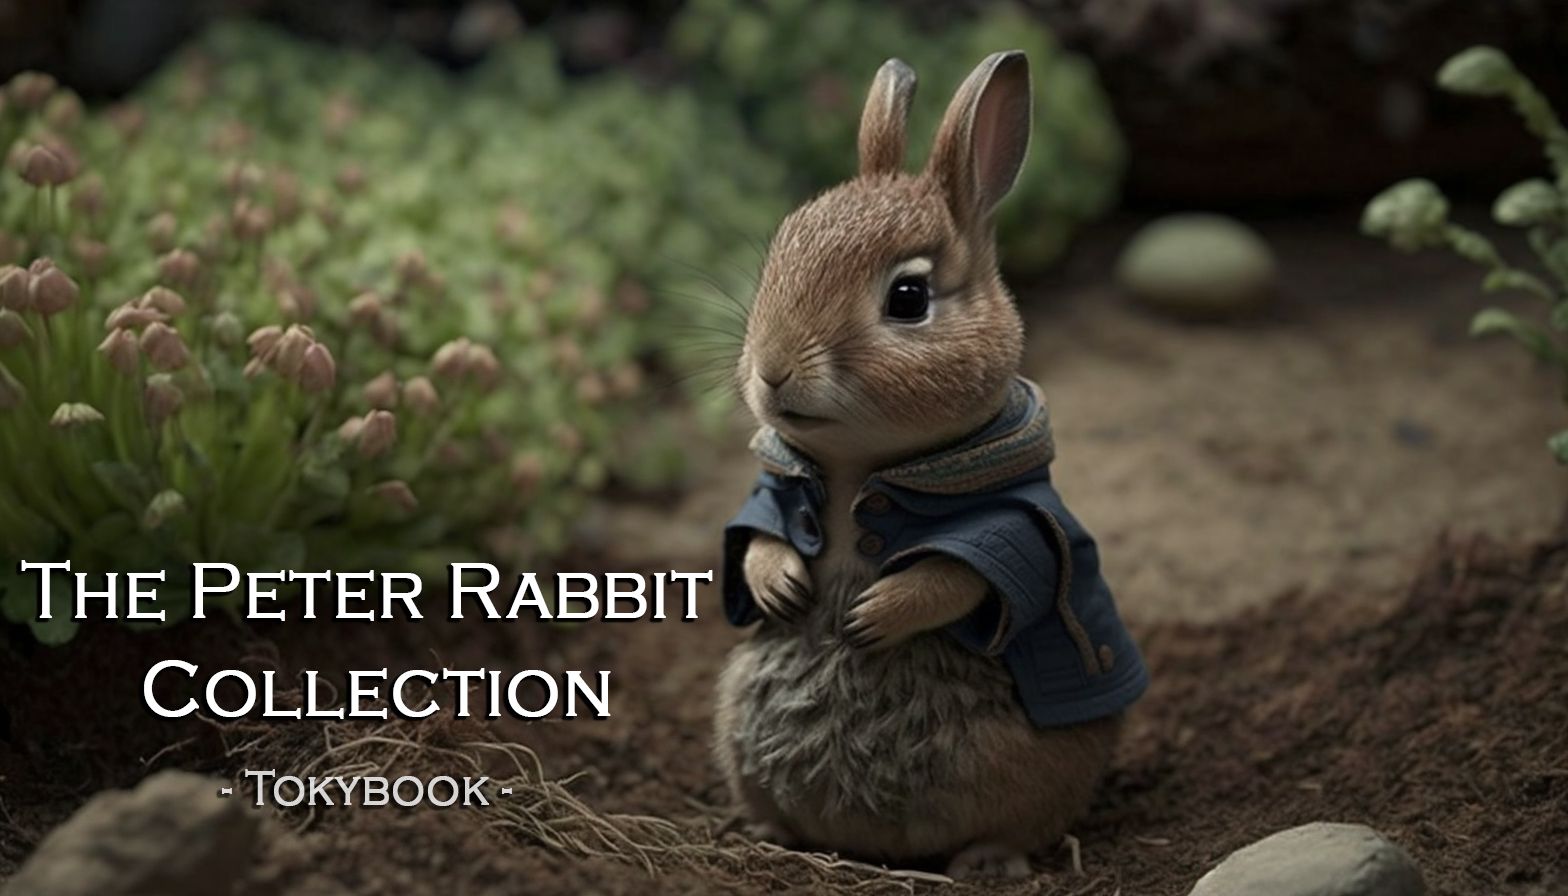 The Peter Rabbit Collection audiobook by Beatrix Potter